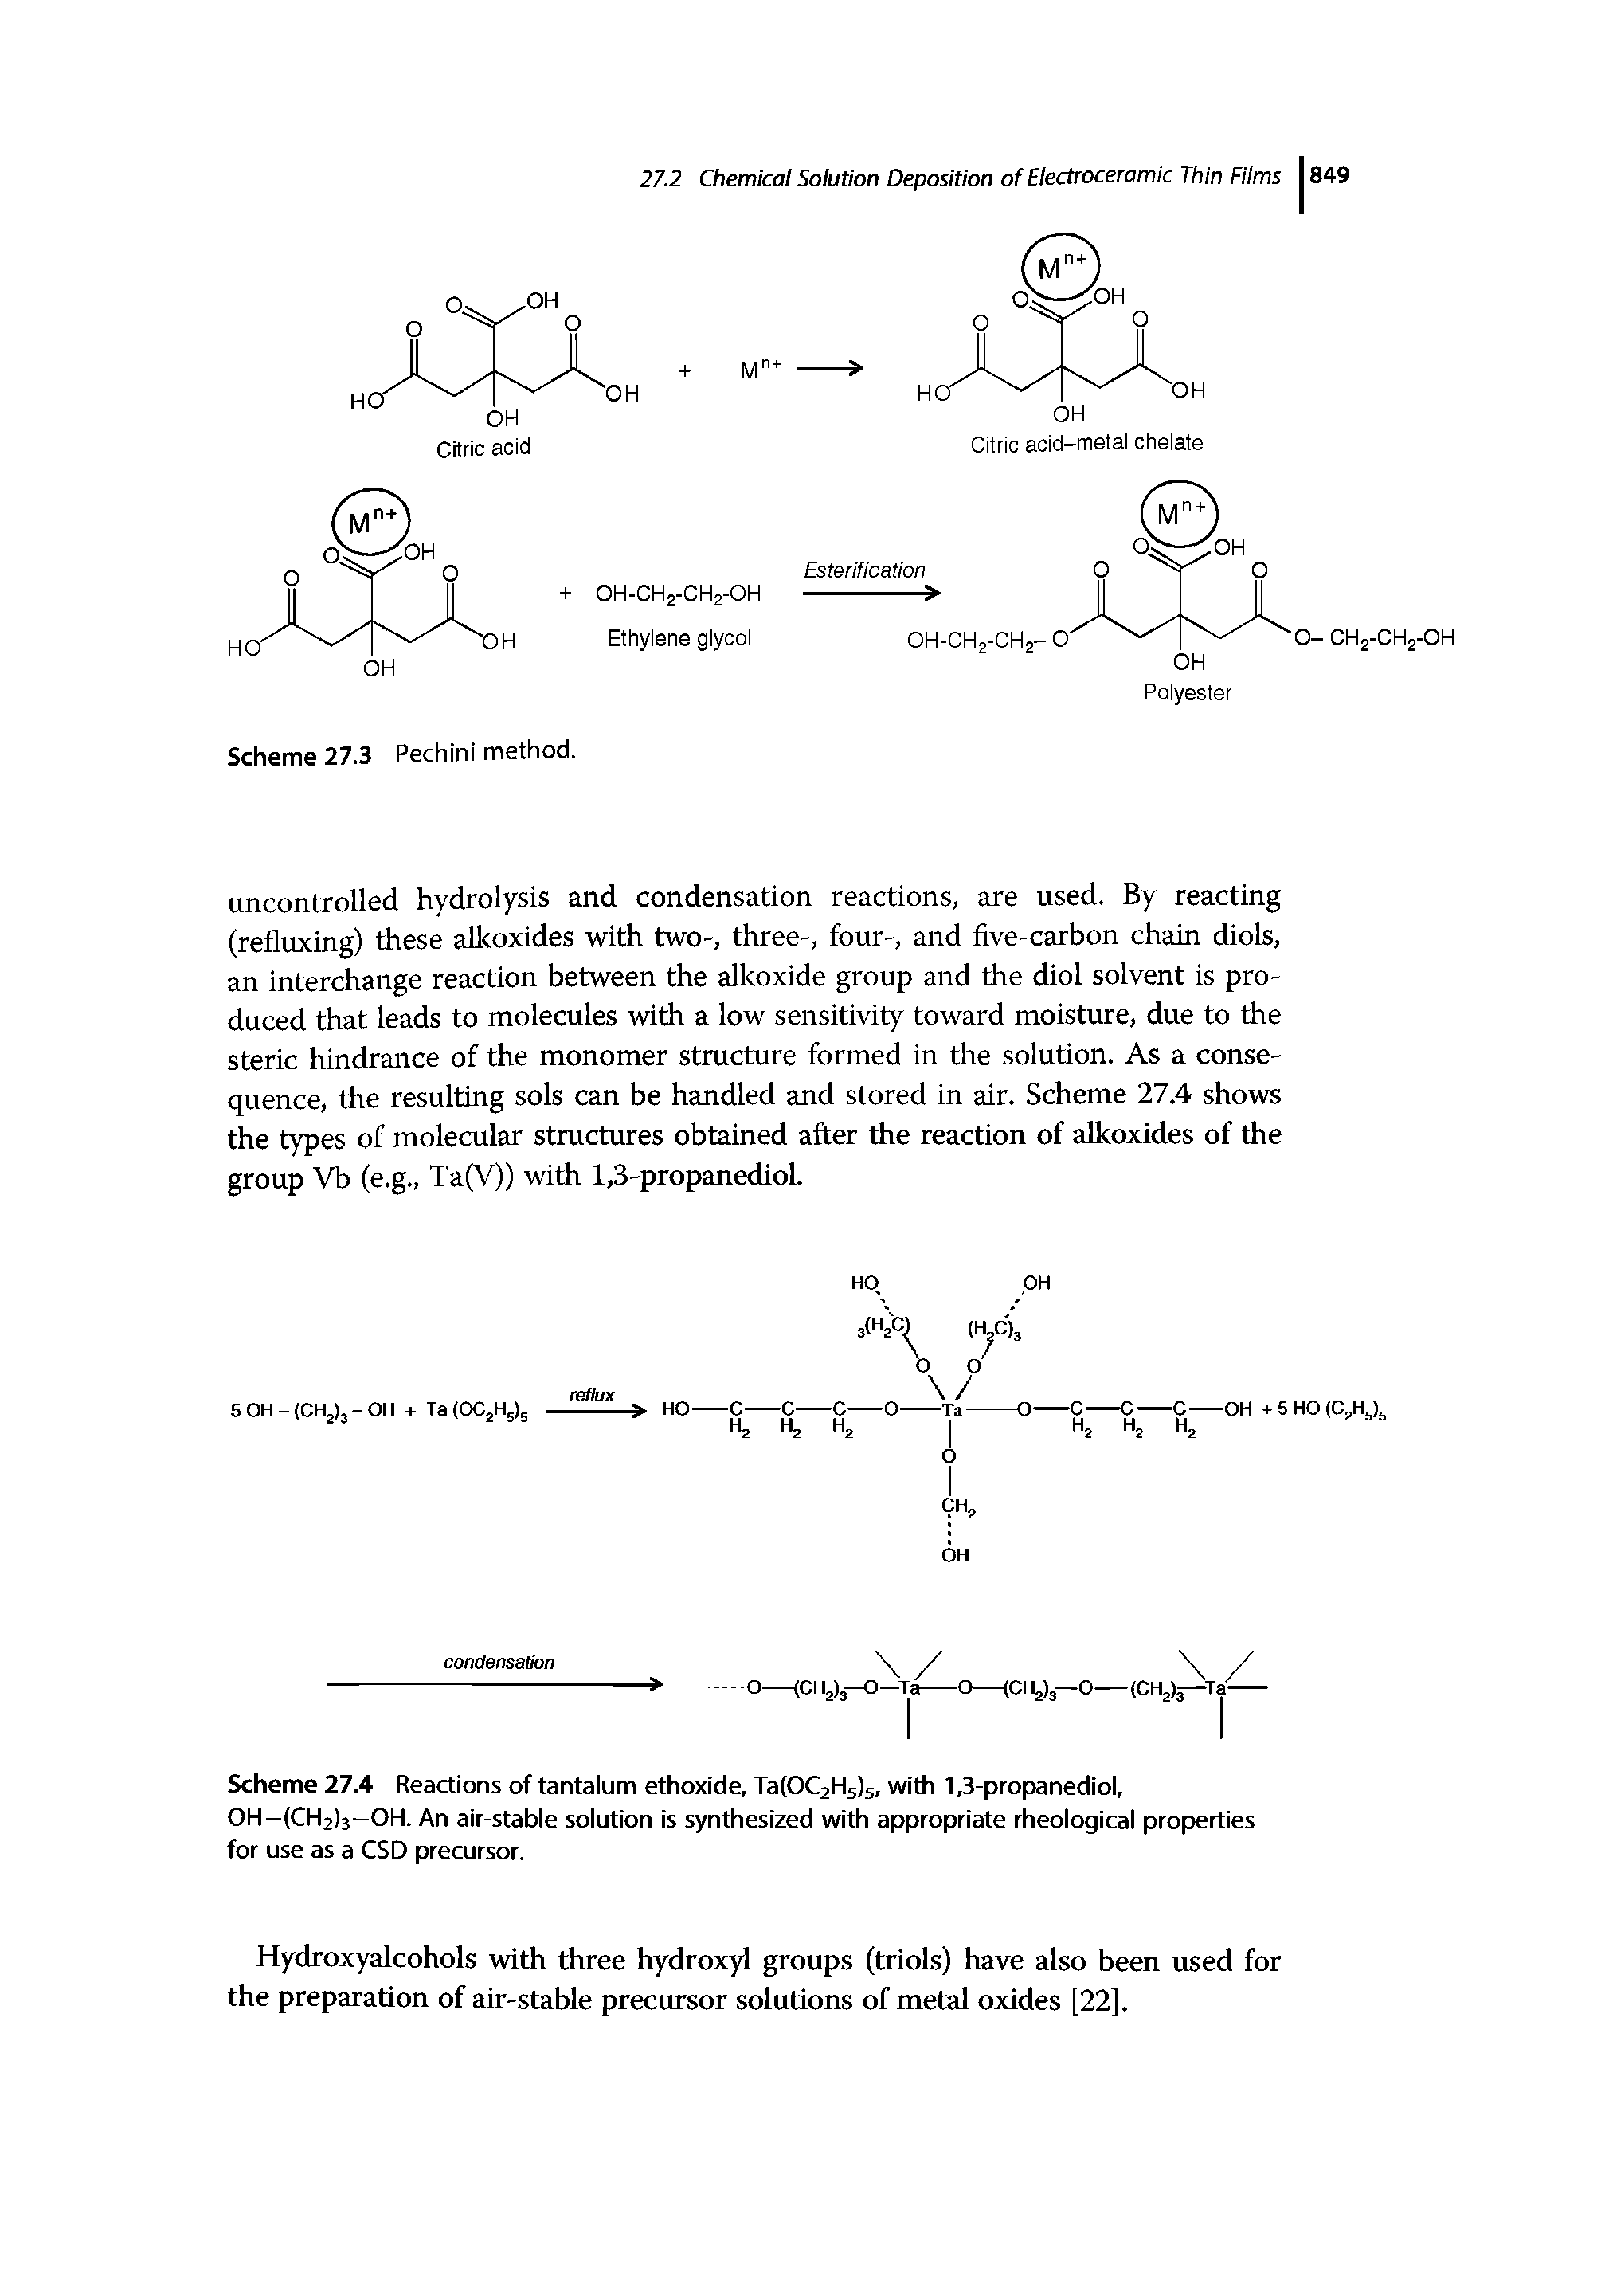 Scheme 27.4 Reactions of tantalum ethoxide, Ta(OC2H5)5, with 1,3-propanediol, 0H-(CH2)3-0H. An air-stable solution is synthesized with appropriate rheological properties for use as a CSD precursor.